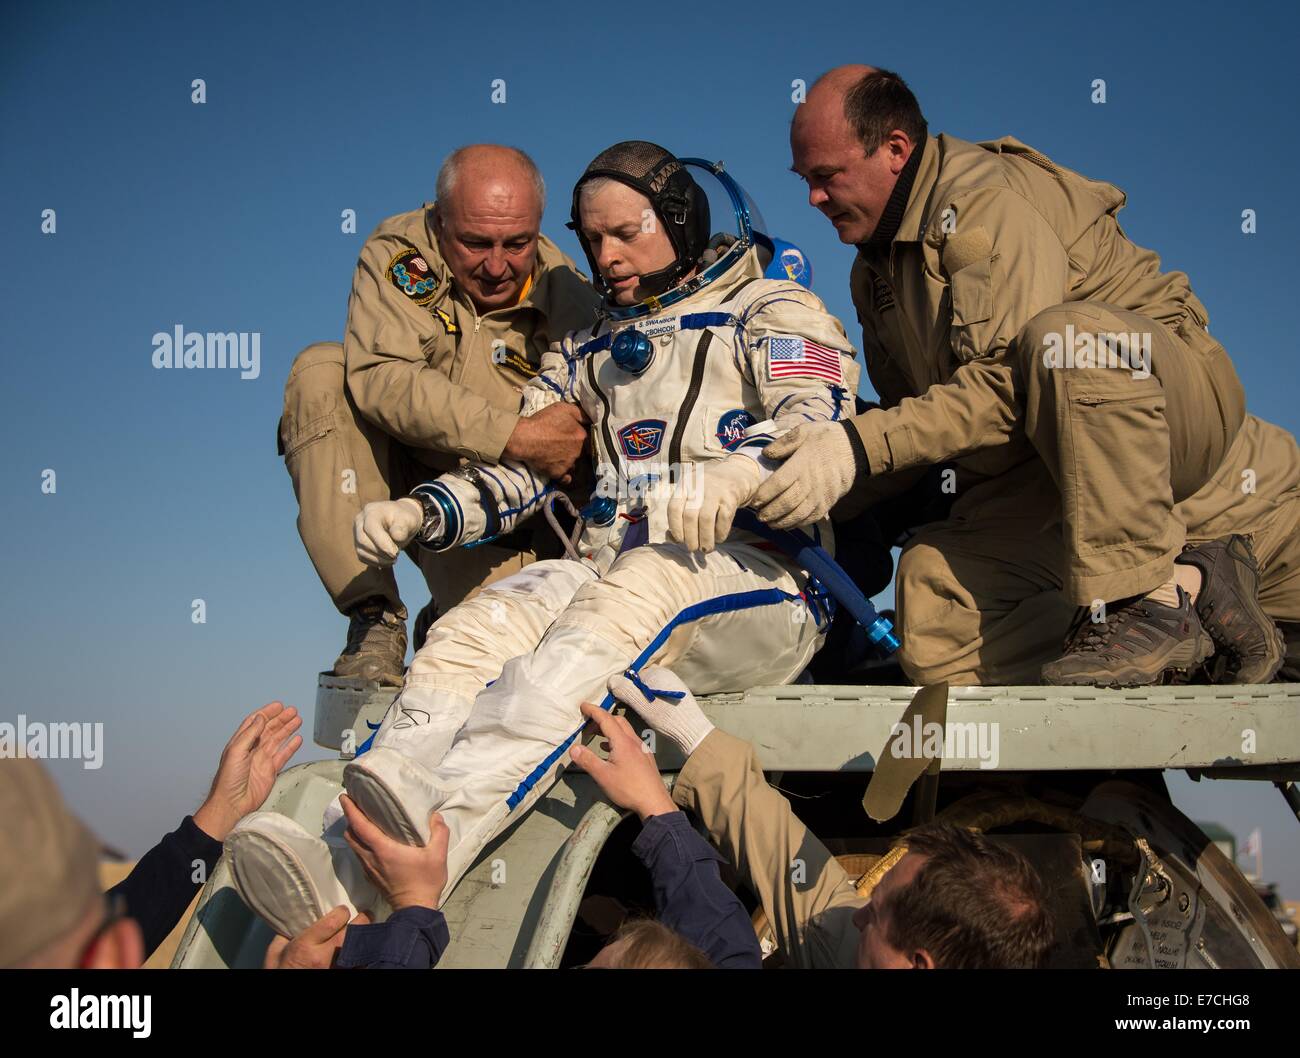 International Space Station Expedition 40 Commander Steve Swanson of NASA is helped out of the Soyuz Capsule just minutes after landing September 11, 2014 in Zhezkazgan, Kazakhstan. Swanson, Skvortsov and Artemyev returned to Earth after more than five months onboard the International Space Station where they served as members of the Expedition 39 and 40 crews. Stock Photo